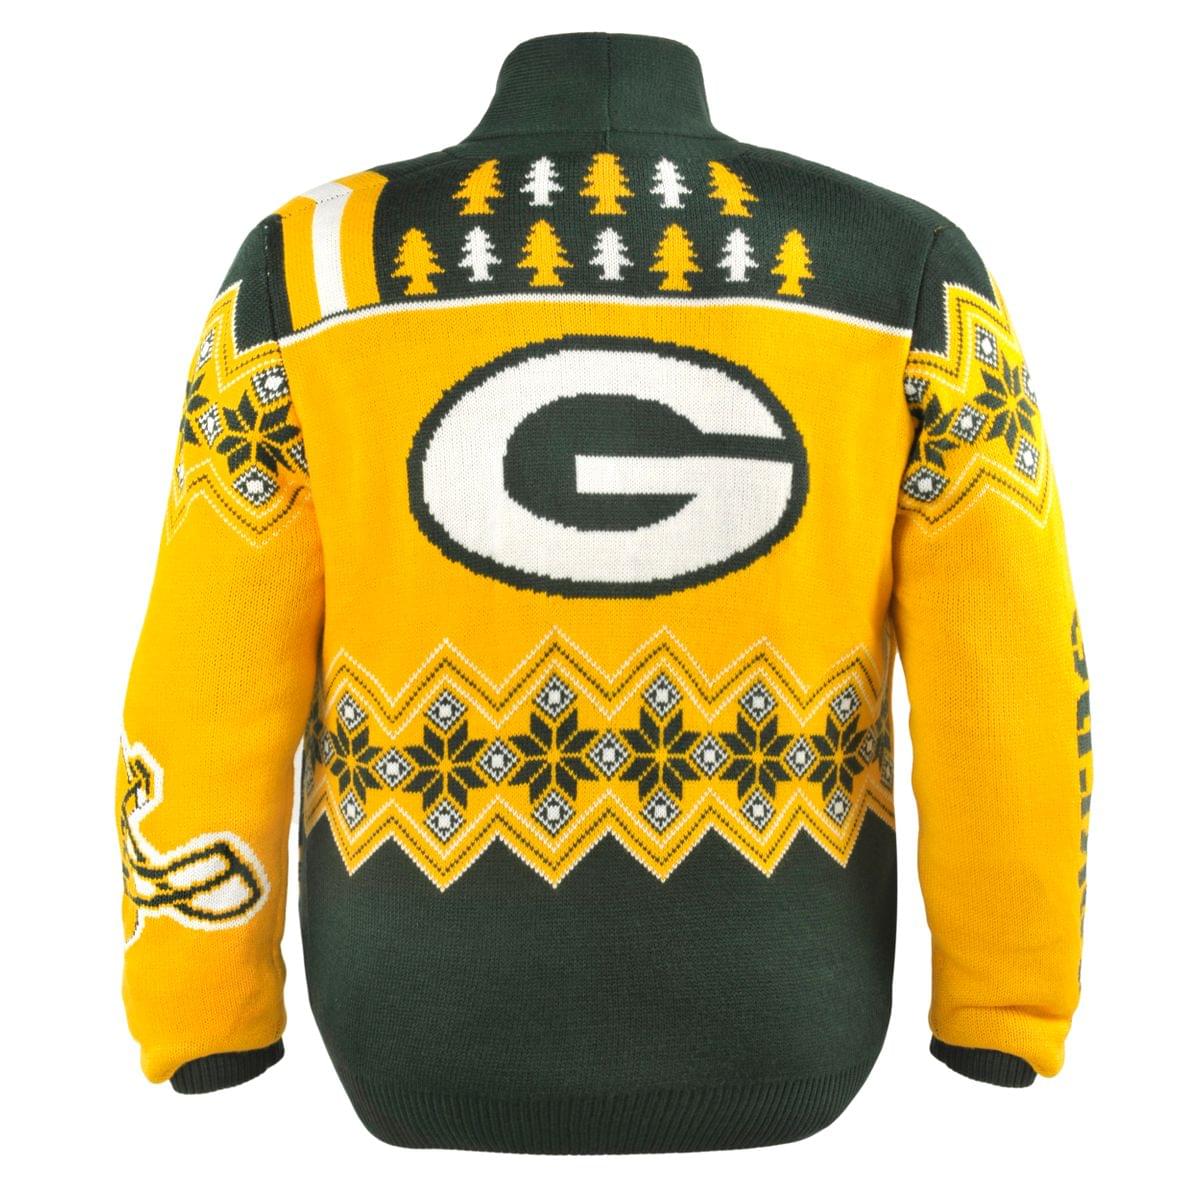 Green Bay Packers NFL Adult Ugly Cardigan Sweater